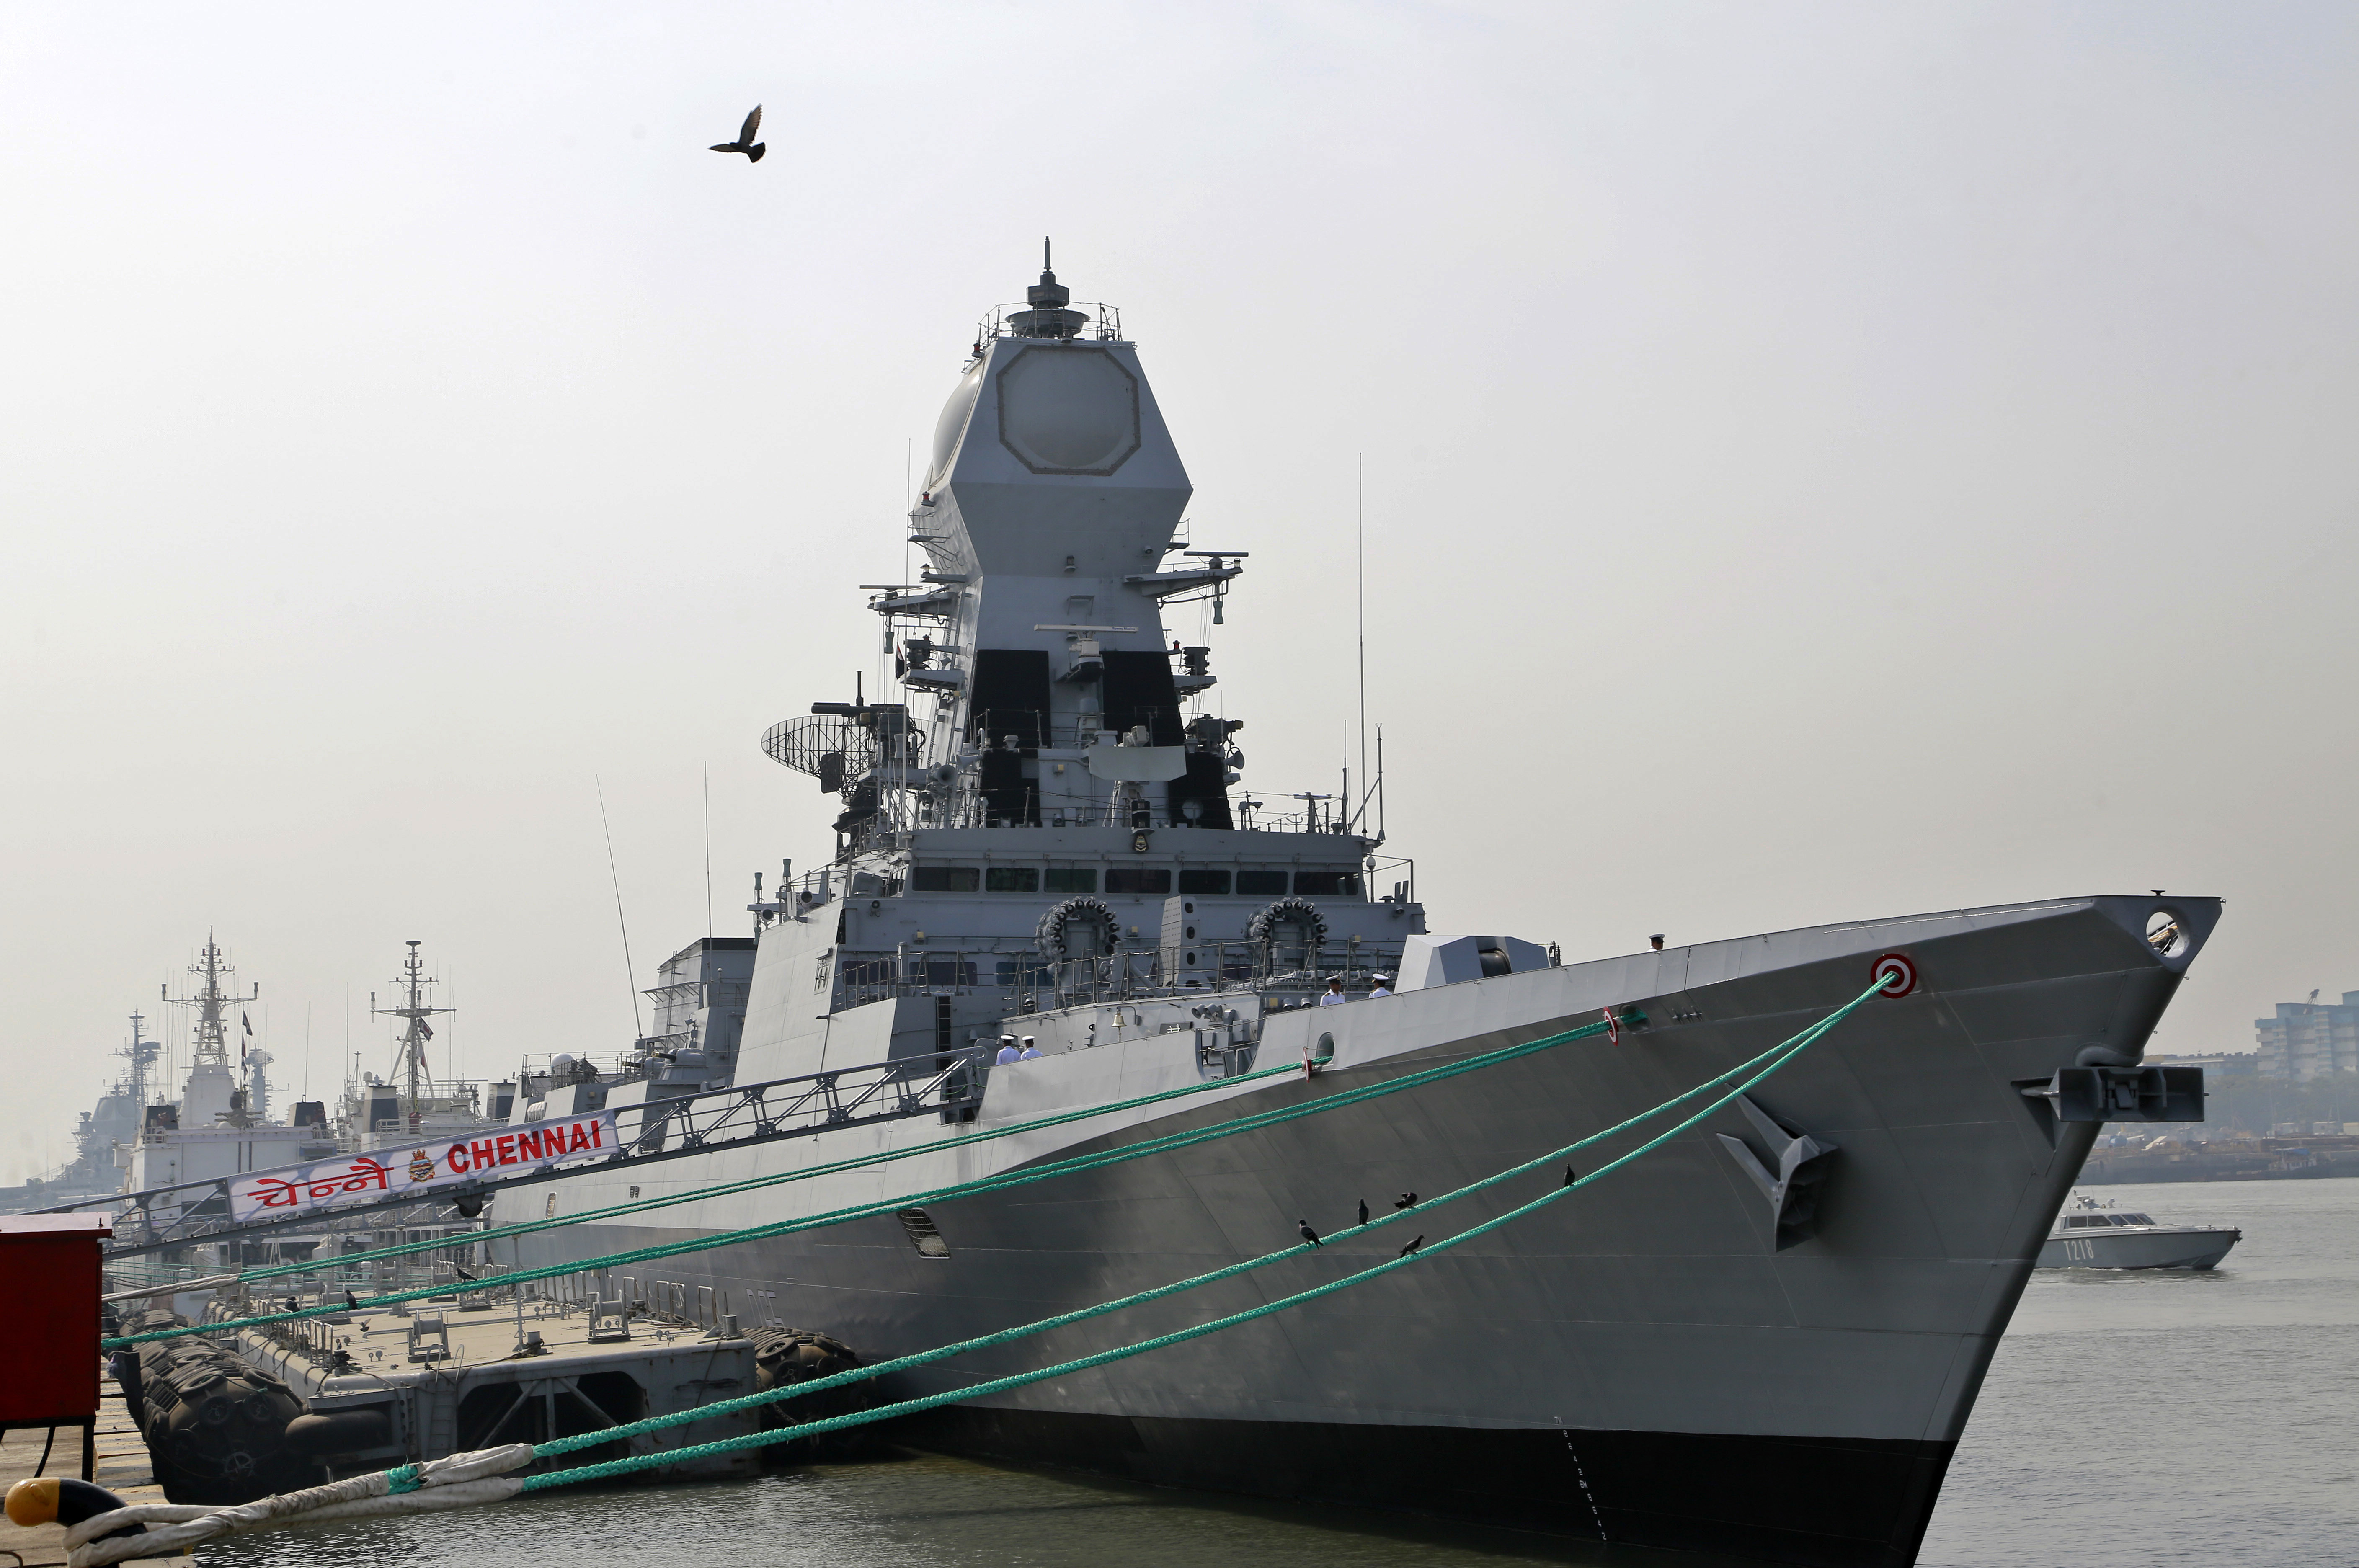 FILE- INS Chennai, a Kolkata class destroyer, is moored at a jetty in Mumbai, India, Friday, Nov. 18, 2016. The Indian navy said on Friday, Jan. 5, 2023, that it has deployed the ship and a patrol aircraft in the Arabian Sea following a hijacking attempt onboard a Liberia-flagged bulk carrier. (AP Photo/Rajanish Kakade, File)